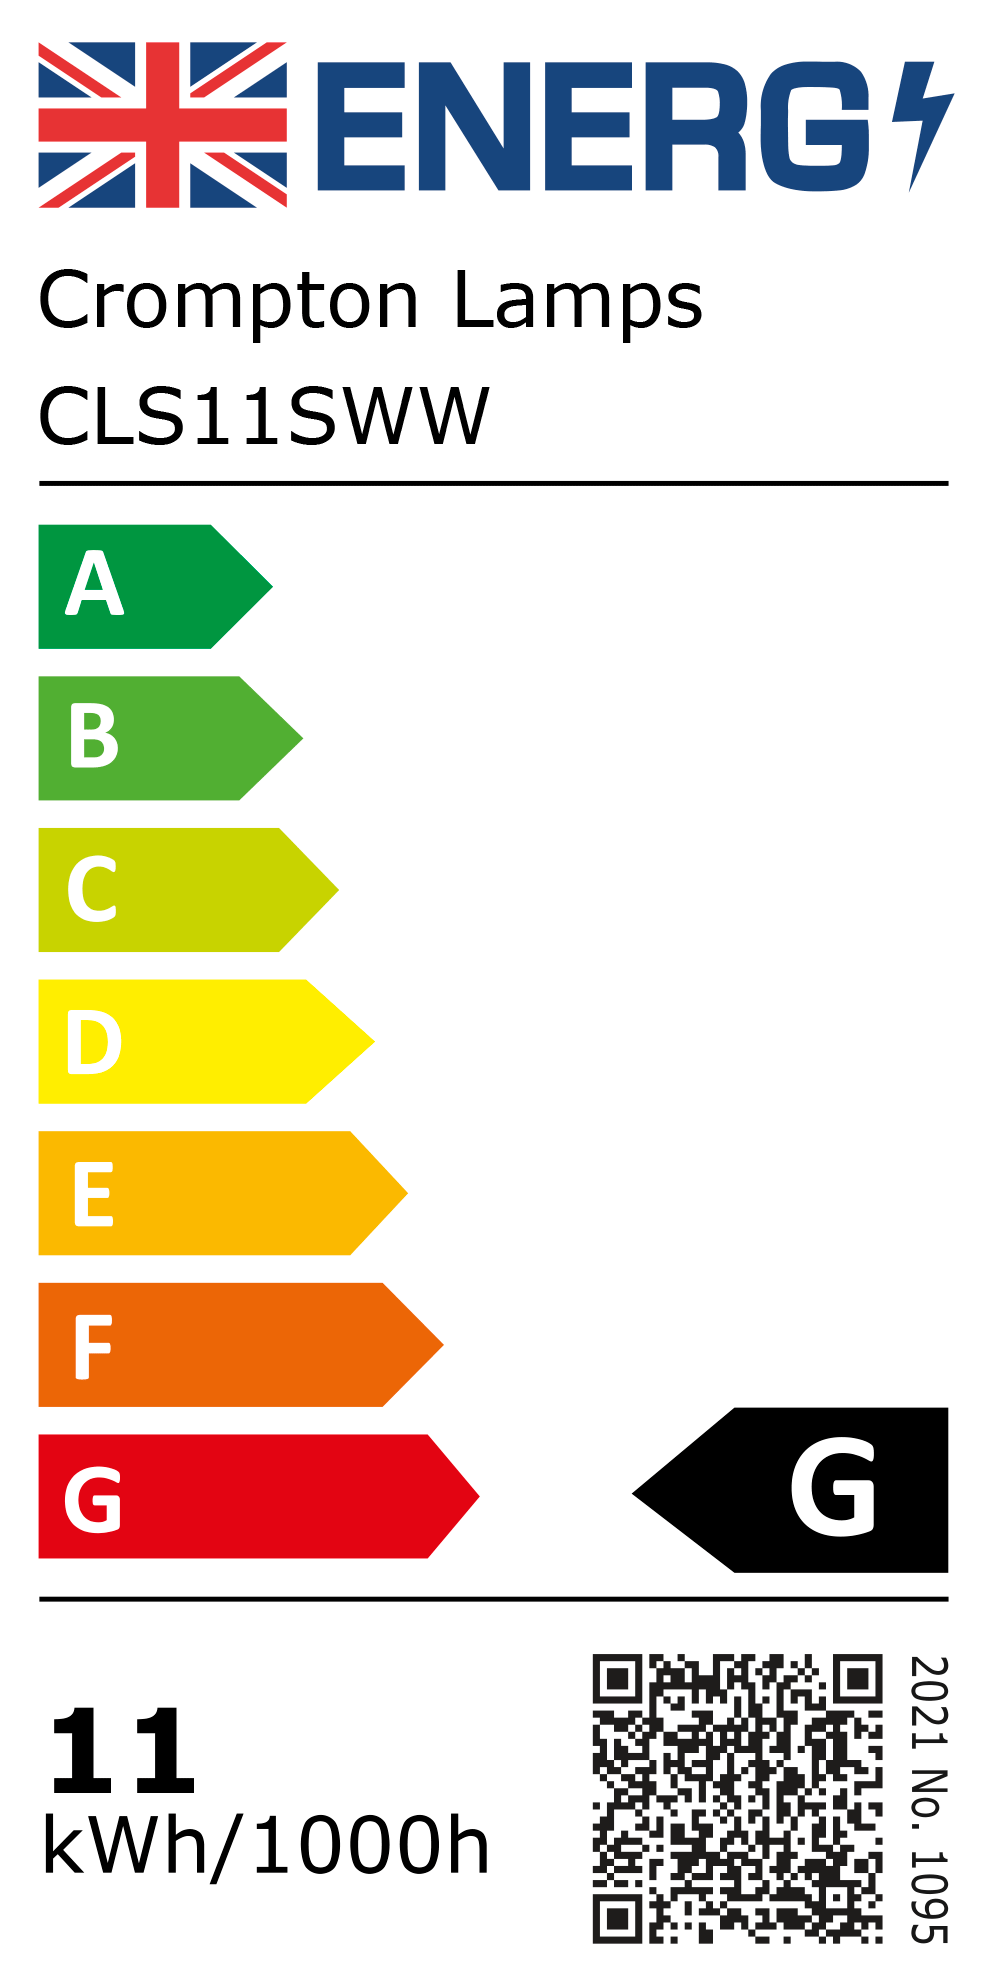 New 2021 Energy Rating Label: Stock Code CLS11SWW